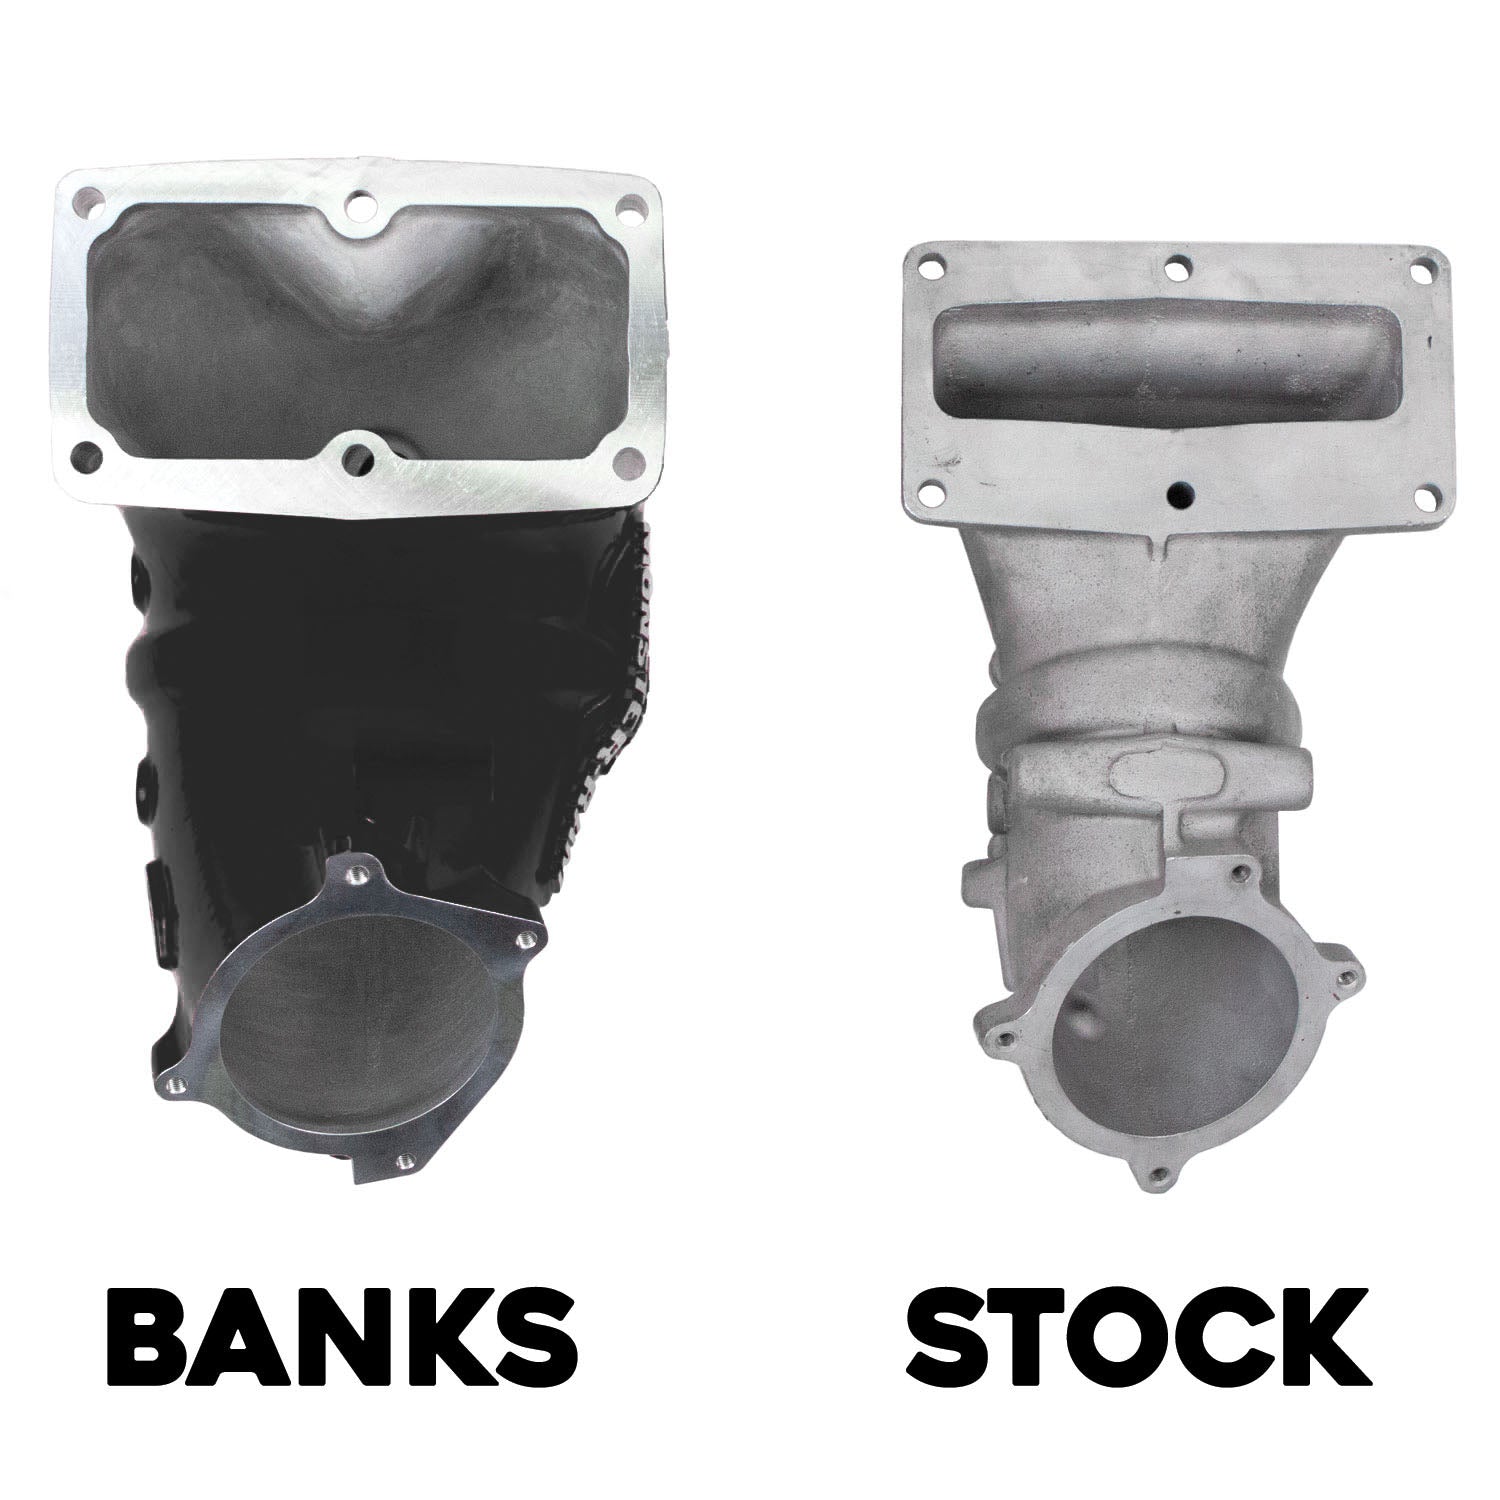 Banks vs stock RAM intake elbows showing the massive outlet size difference